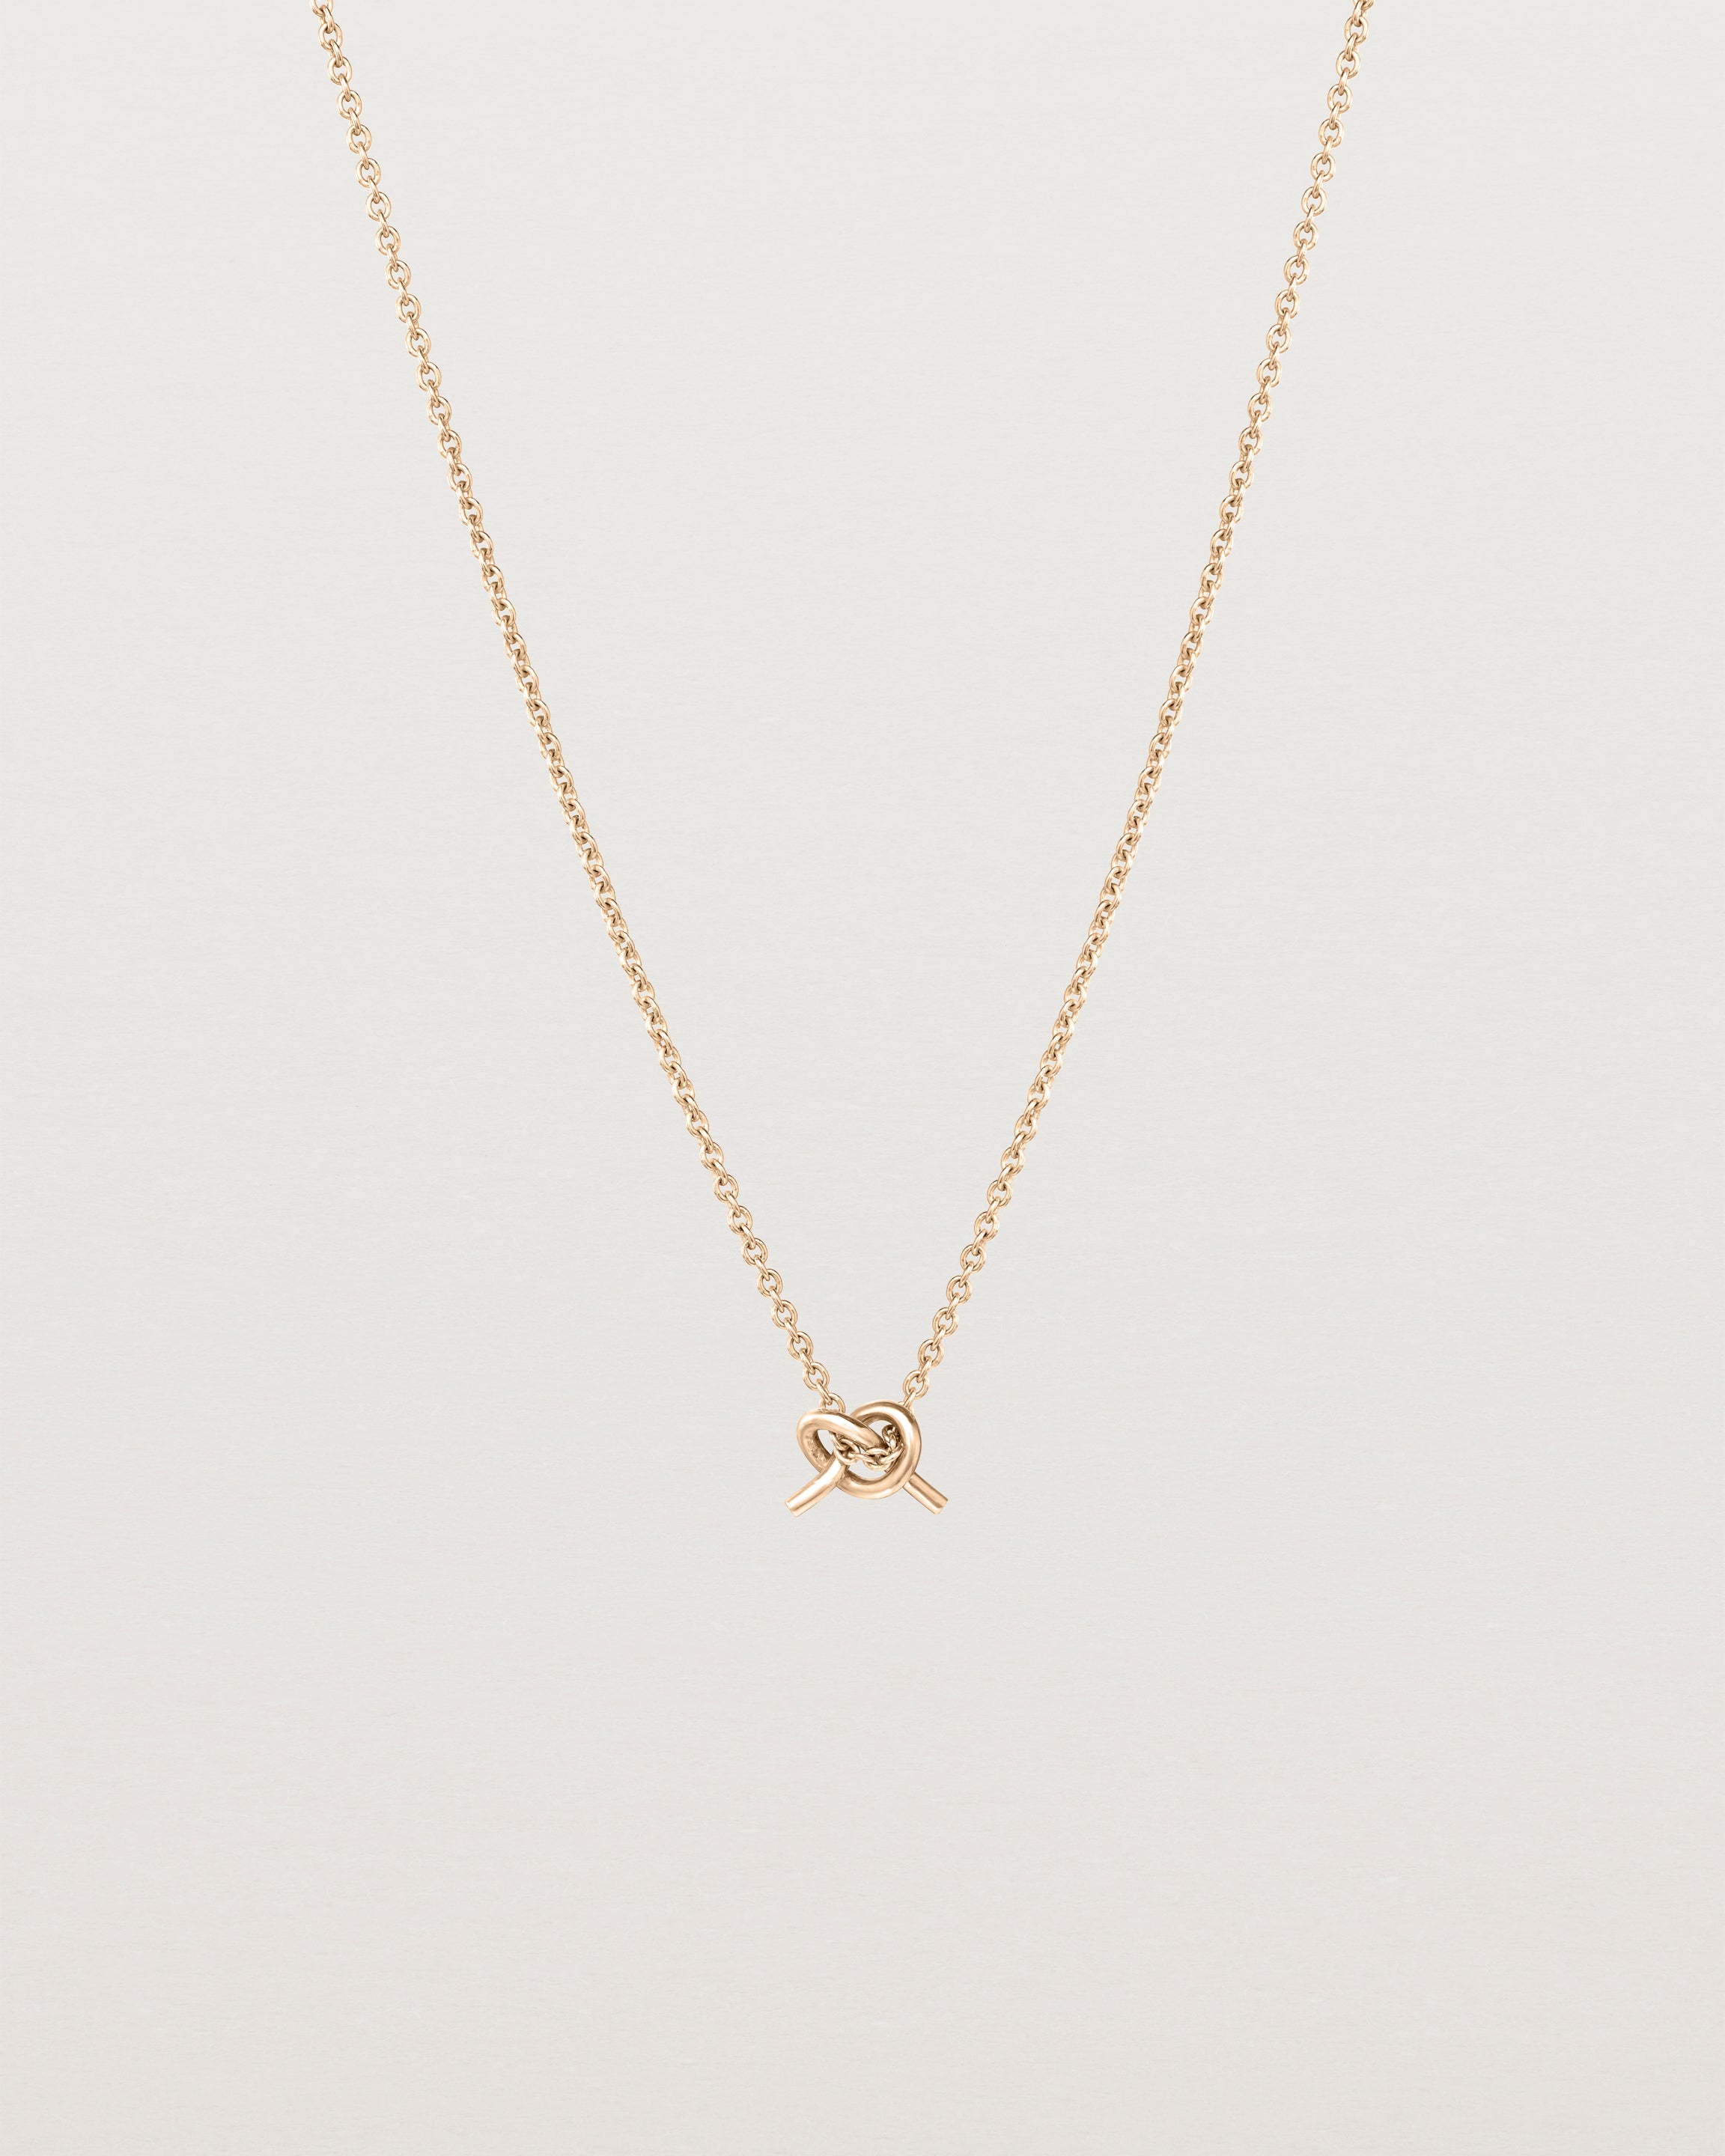 Front view of the Cara Necklace in rose gold.